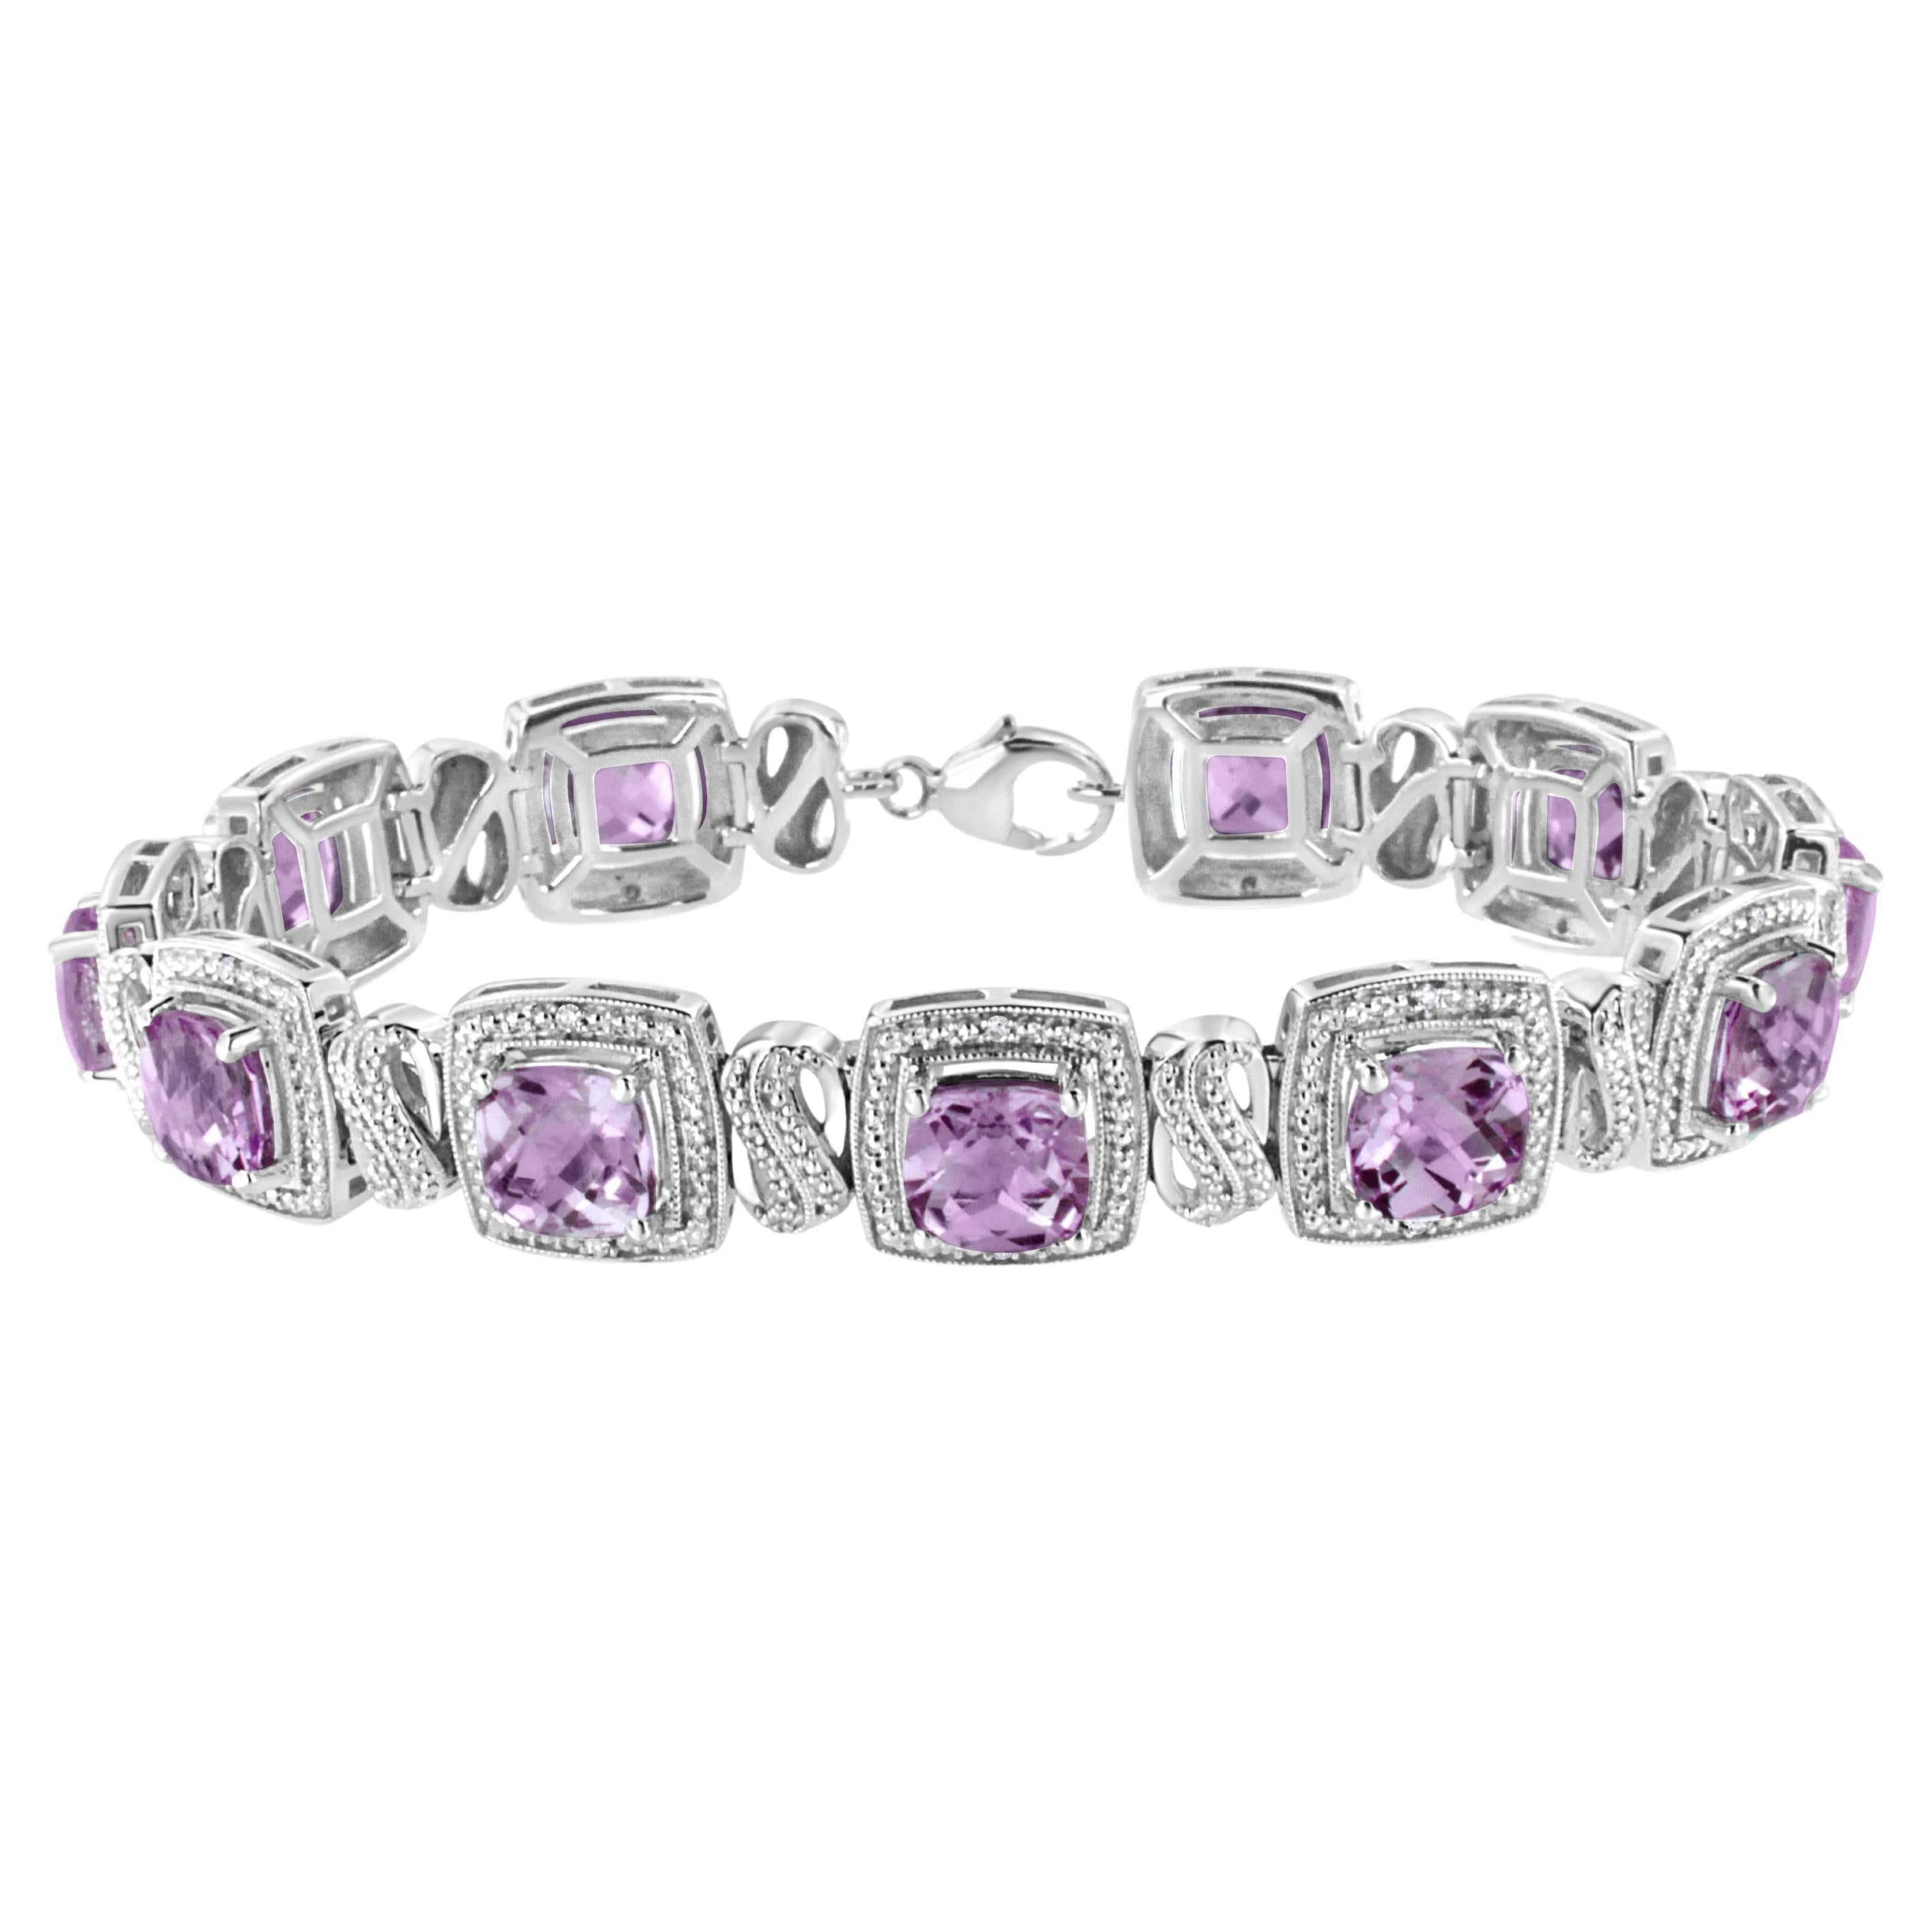 How many diamonds are in a 10ct tennis bracelet?